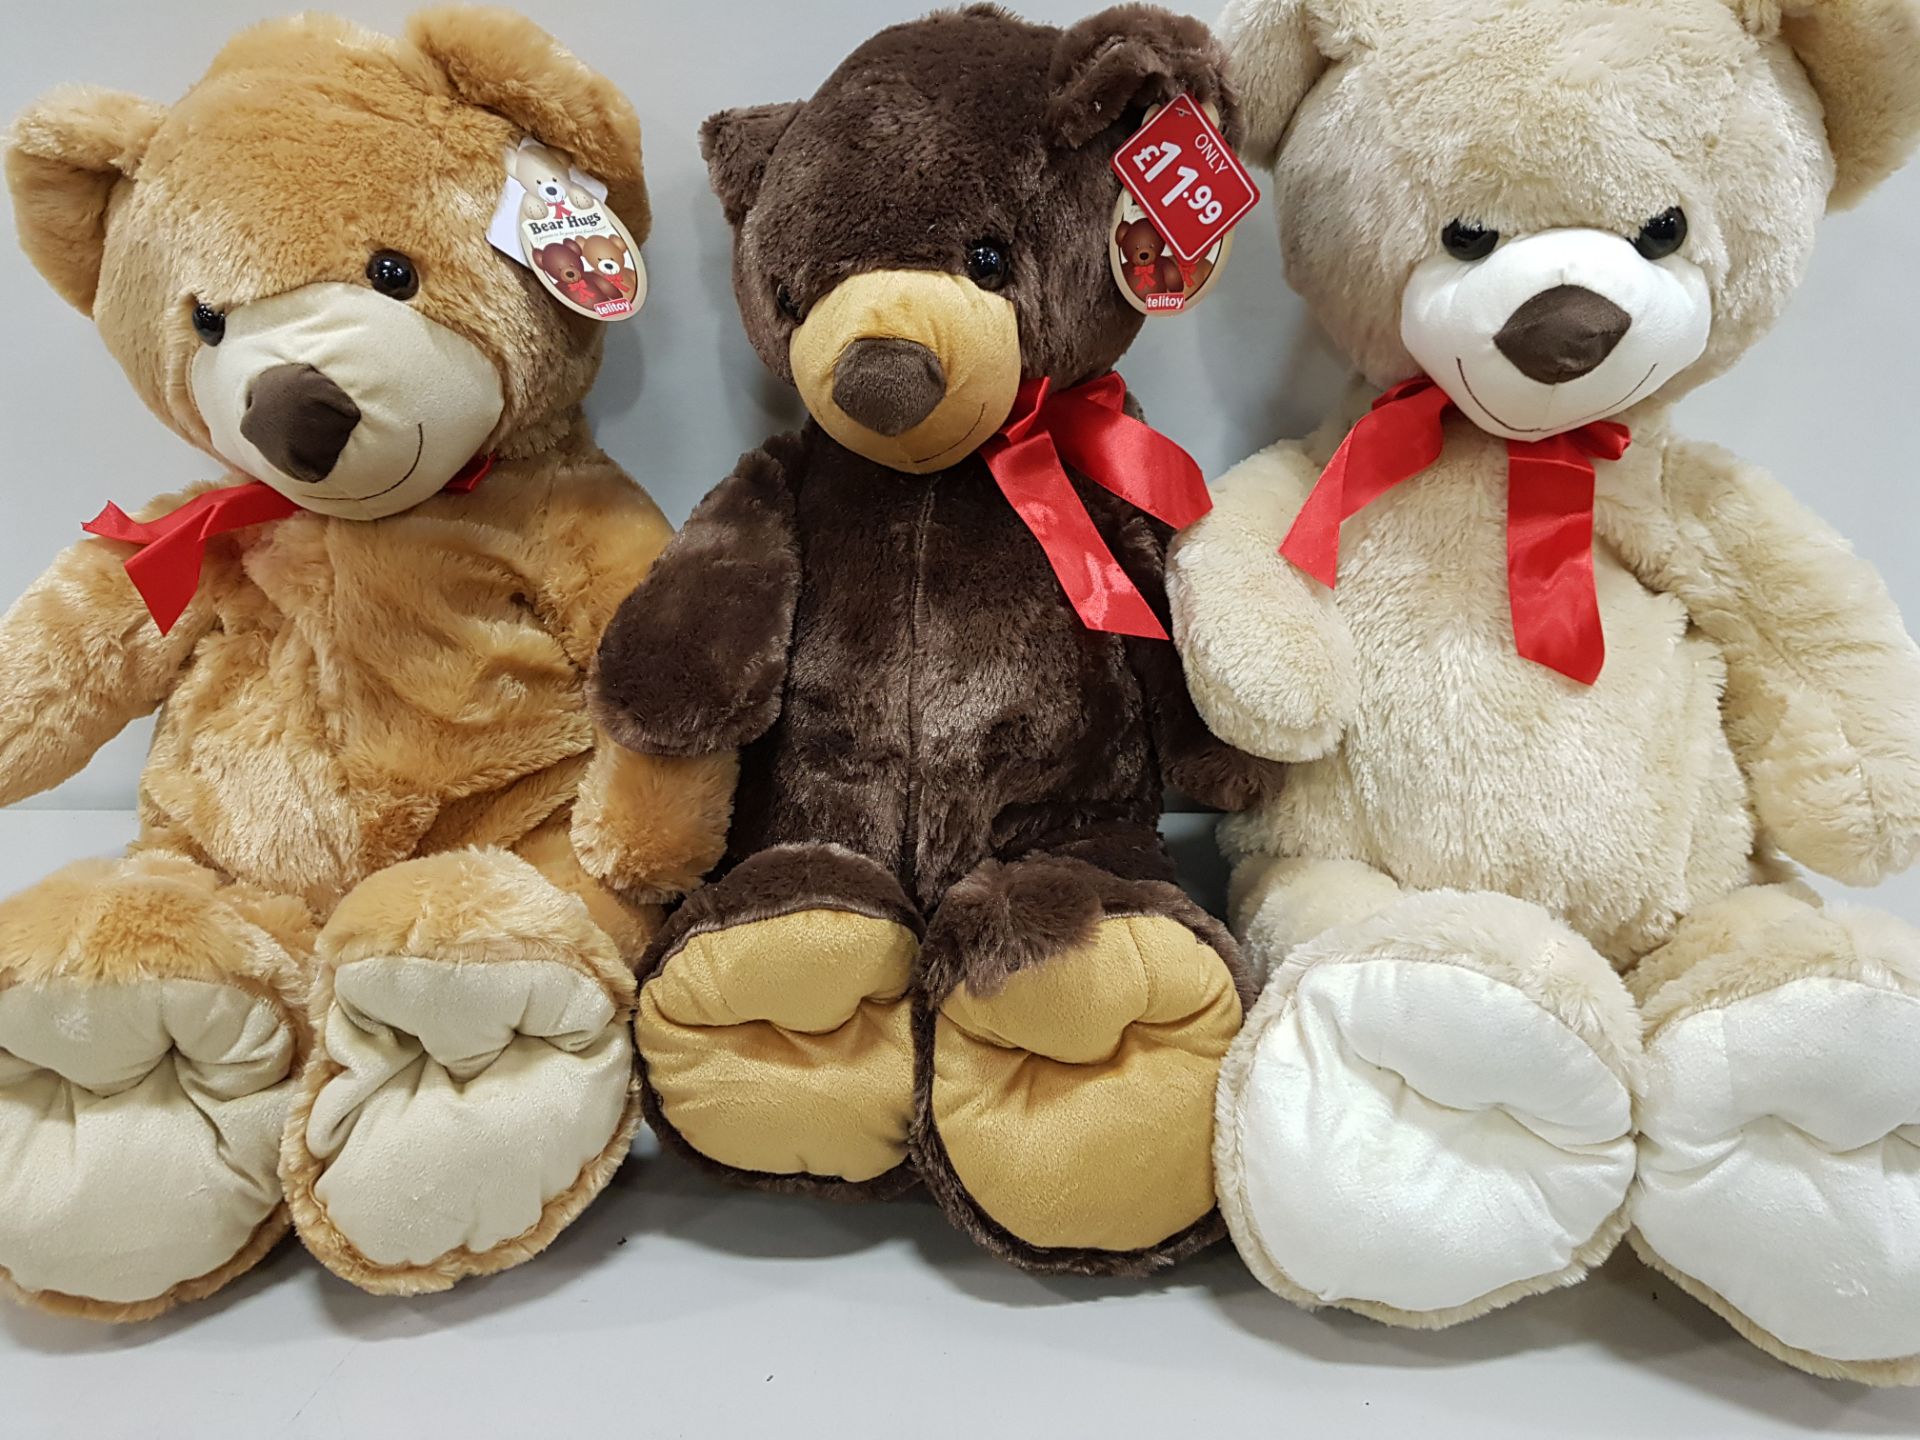 16 X BRAND NEW 100CM TELITOY BEAR HUGS SOFT TOYS IN BROWN AND WHITE RRP £11.99 CONTAINED IN 2